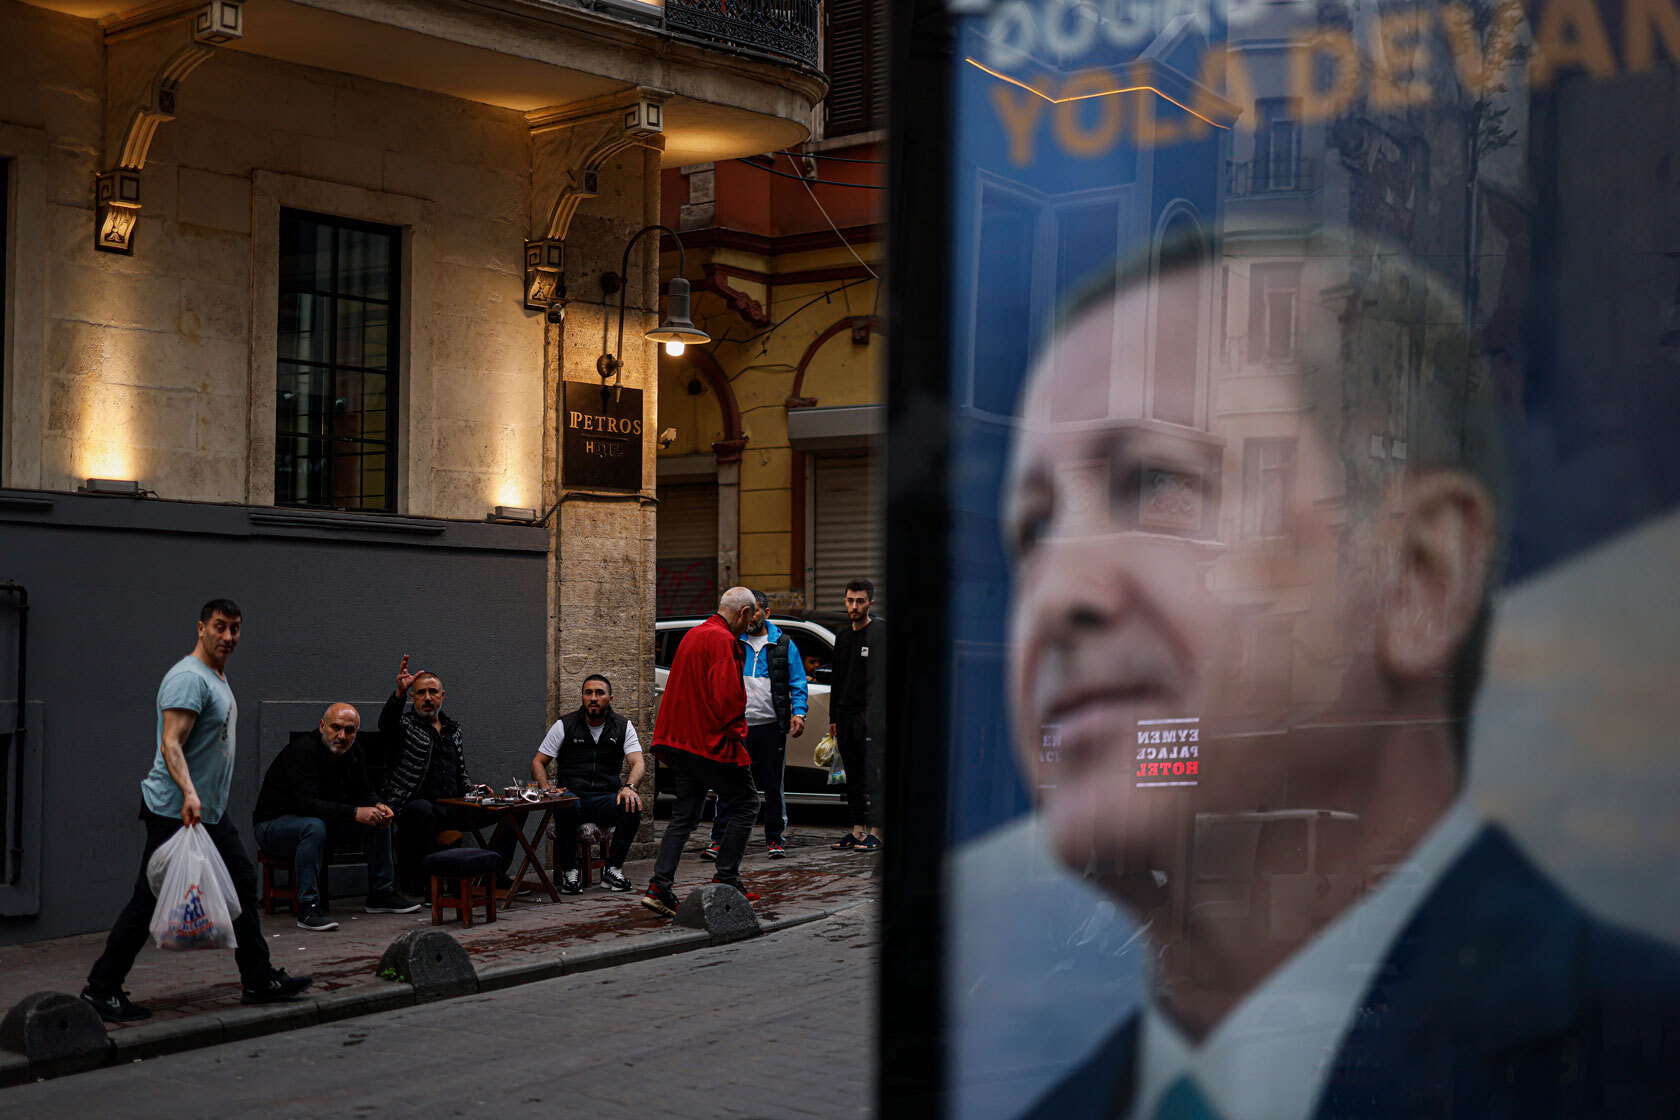 Men drink chai in the street the day after President Recep Tayyip Erdoğan was reelected.